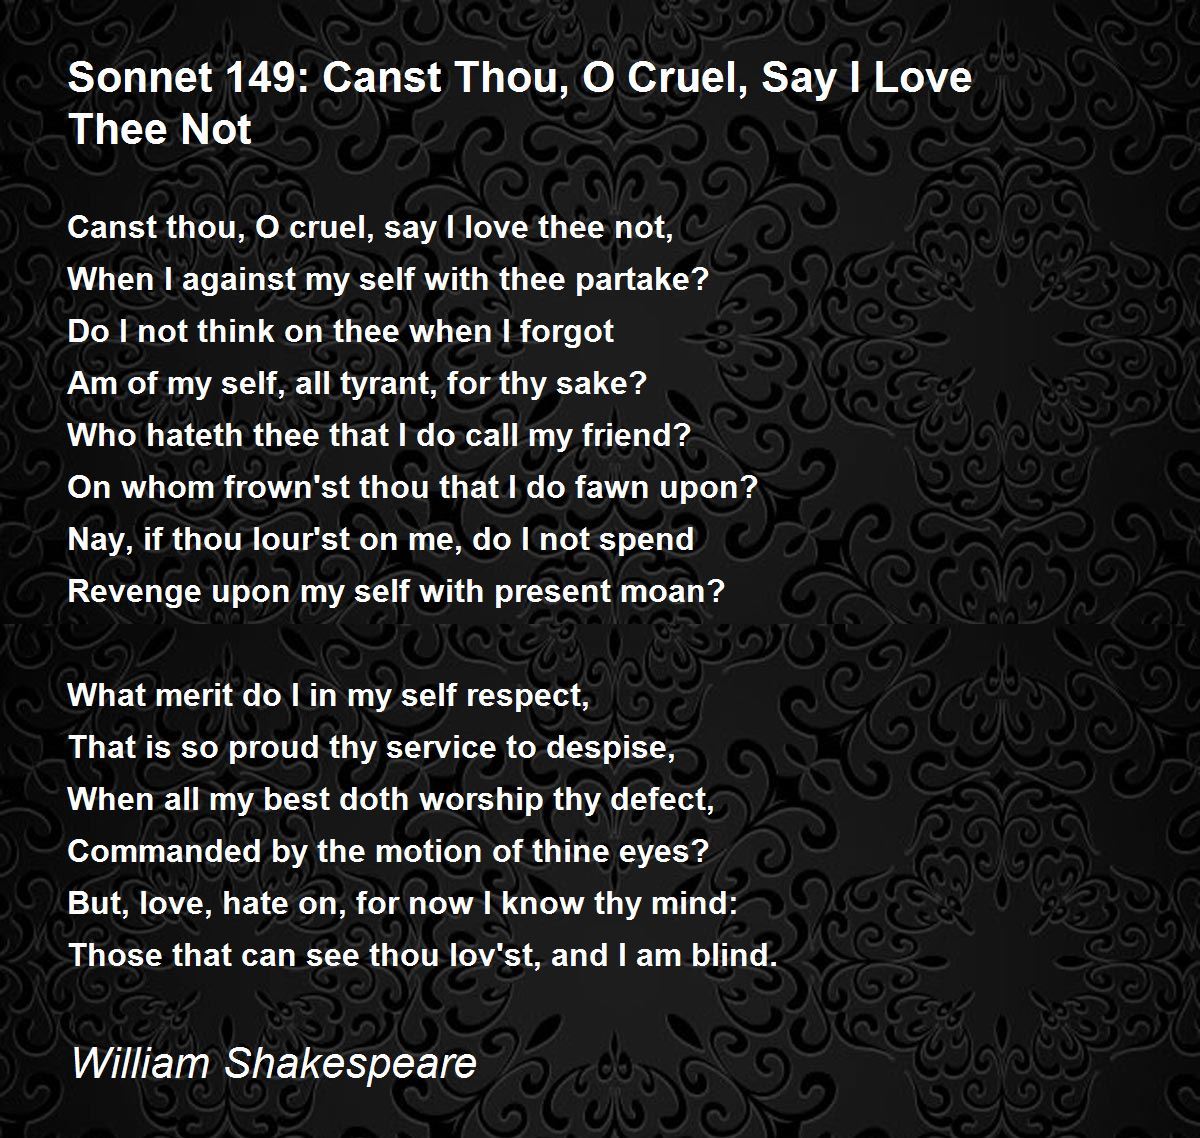 Sonnet 149: Canst Thou, O Cruel, Say I Love Thee Not Poem 